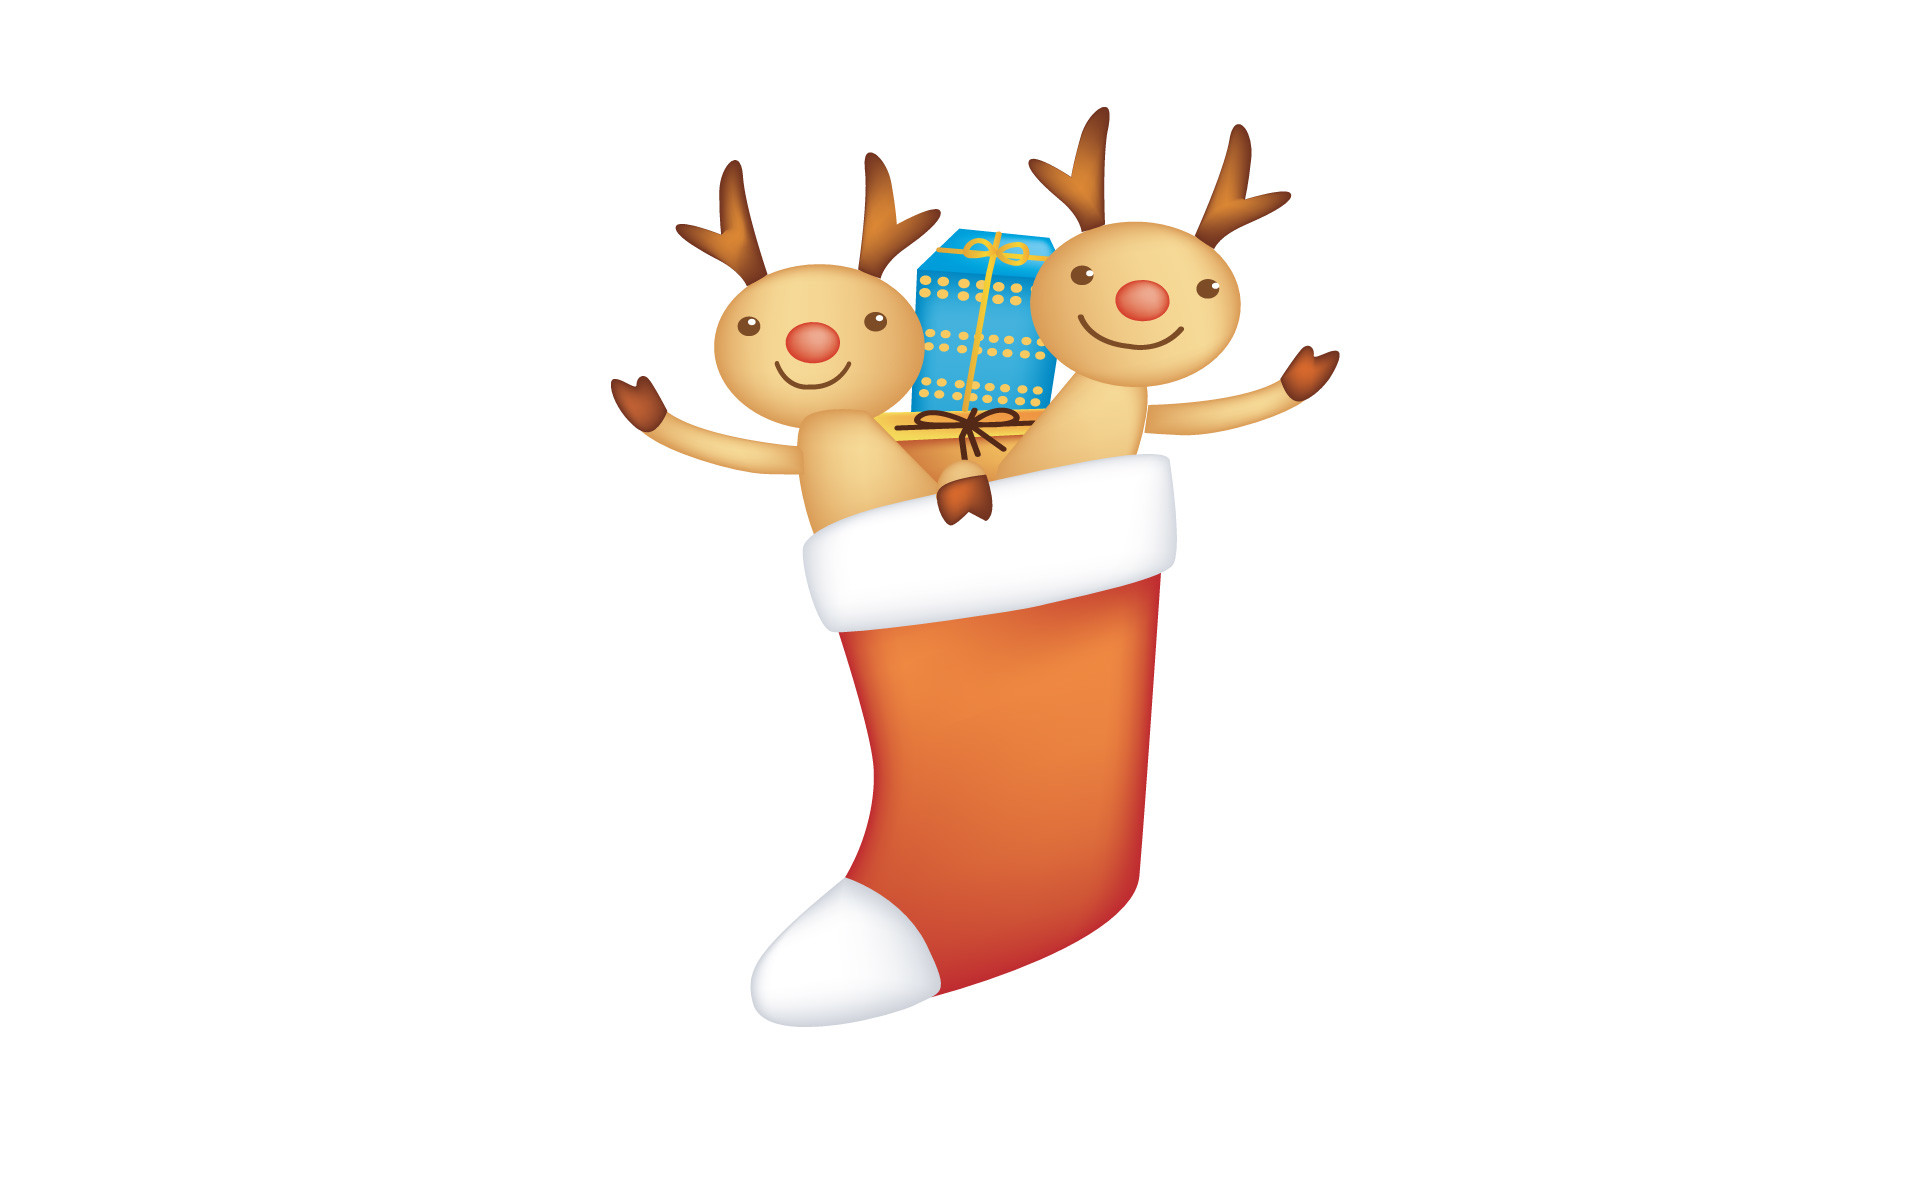 1920x1200 View Original: Cute-reindeer-with-christmas-banner-isolated-on-white.jpg  ()